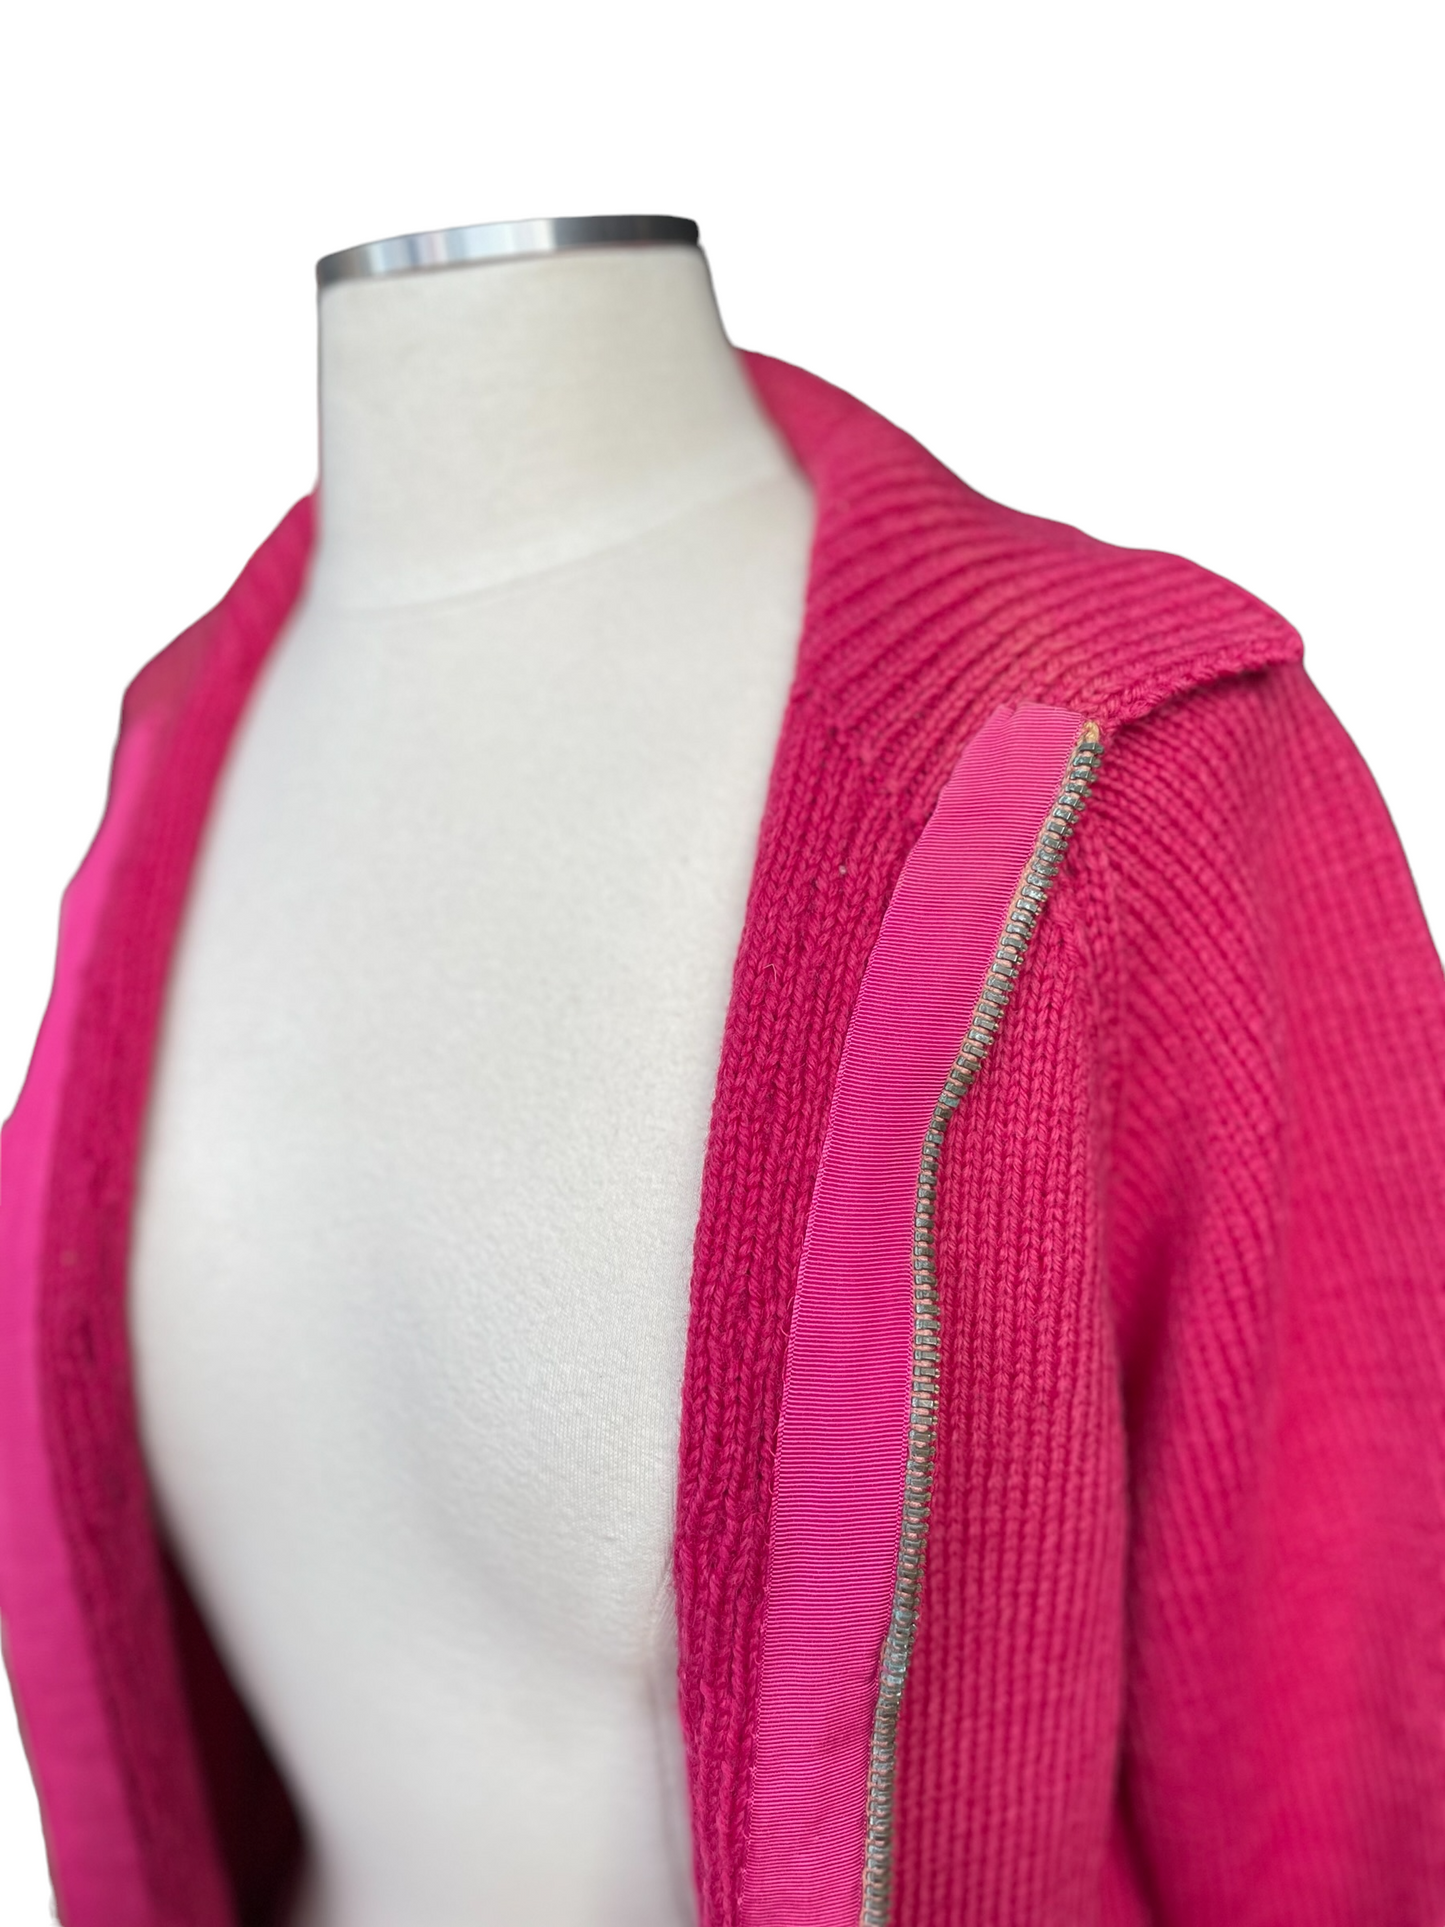 Left side open zipper and minor discoloration view Vintage 1940's Wool Hand Knit Magenta Zip Up Cardigan Sweater | Barn Owl Vintage | Seattle True Vintage